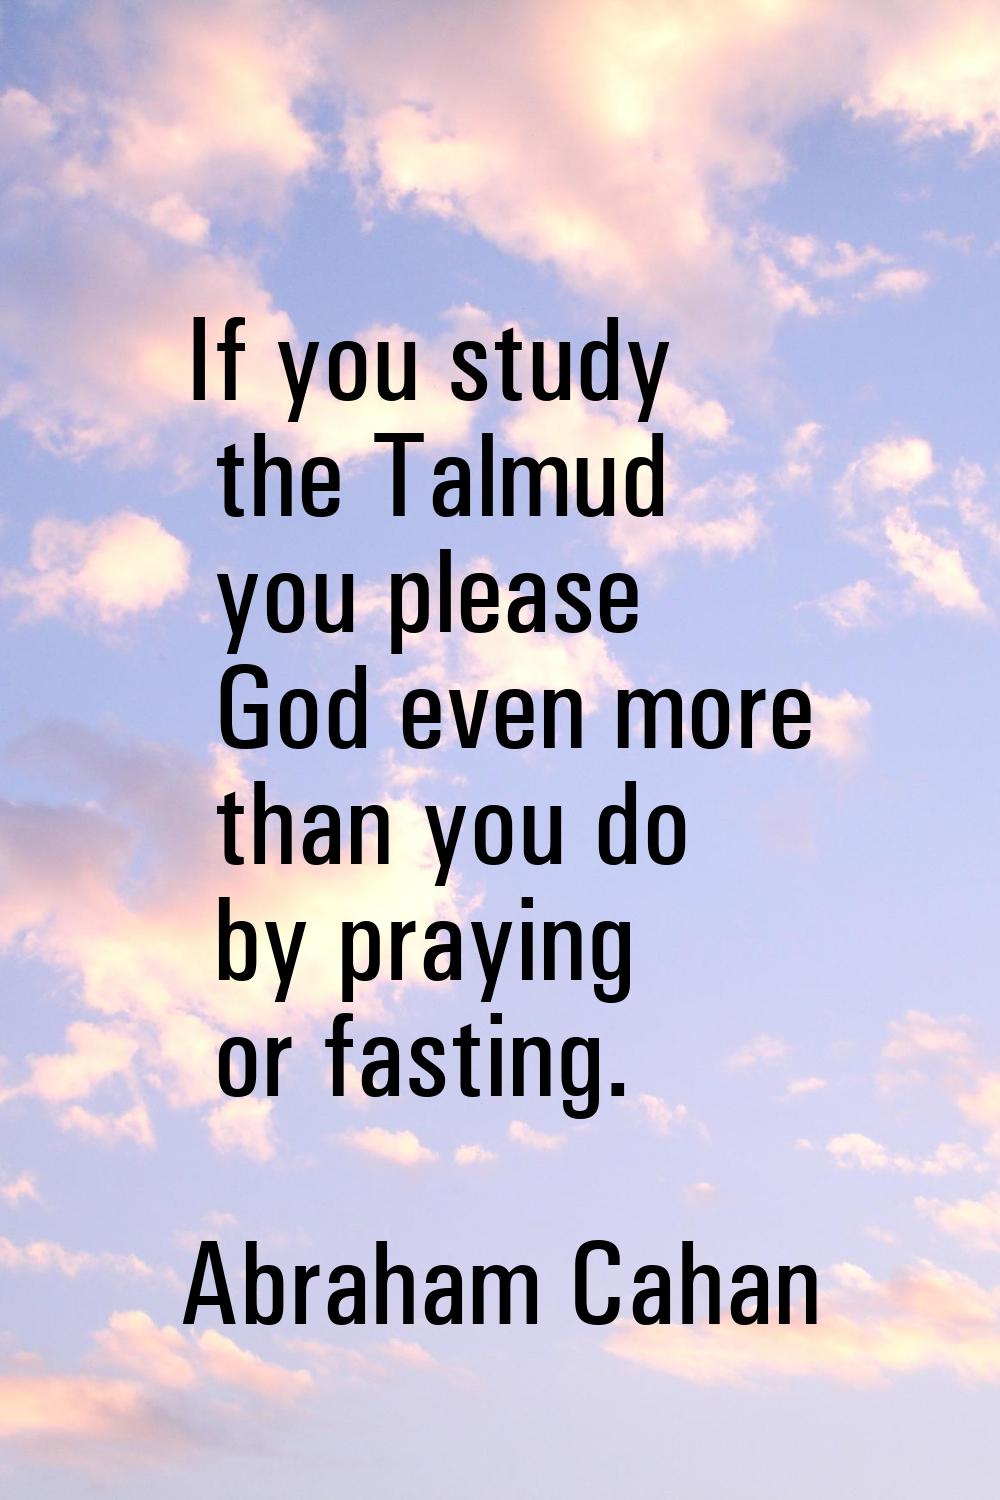 If you study the Talmud you please God even more than you do by praying or fasting.